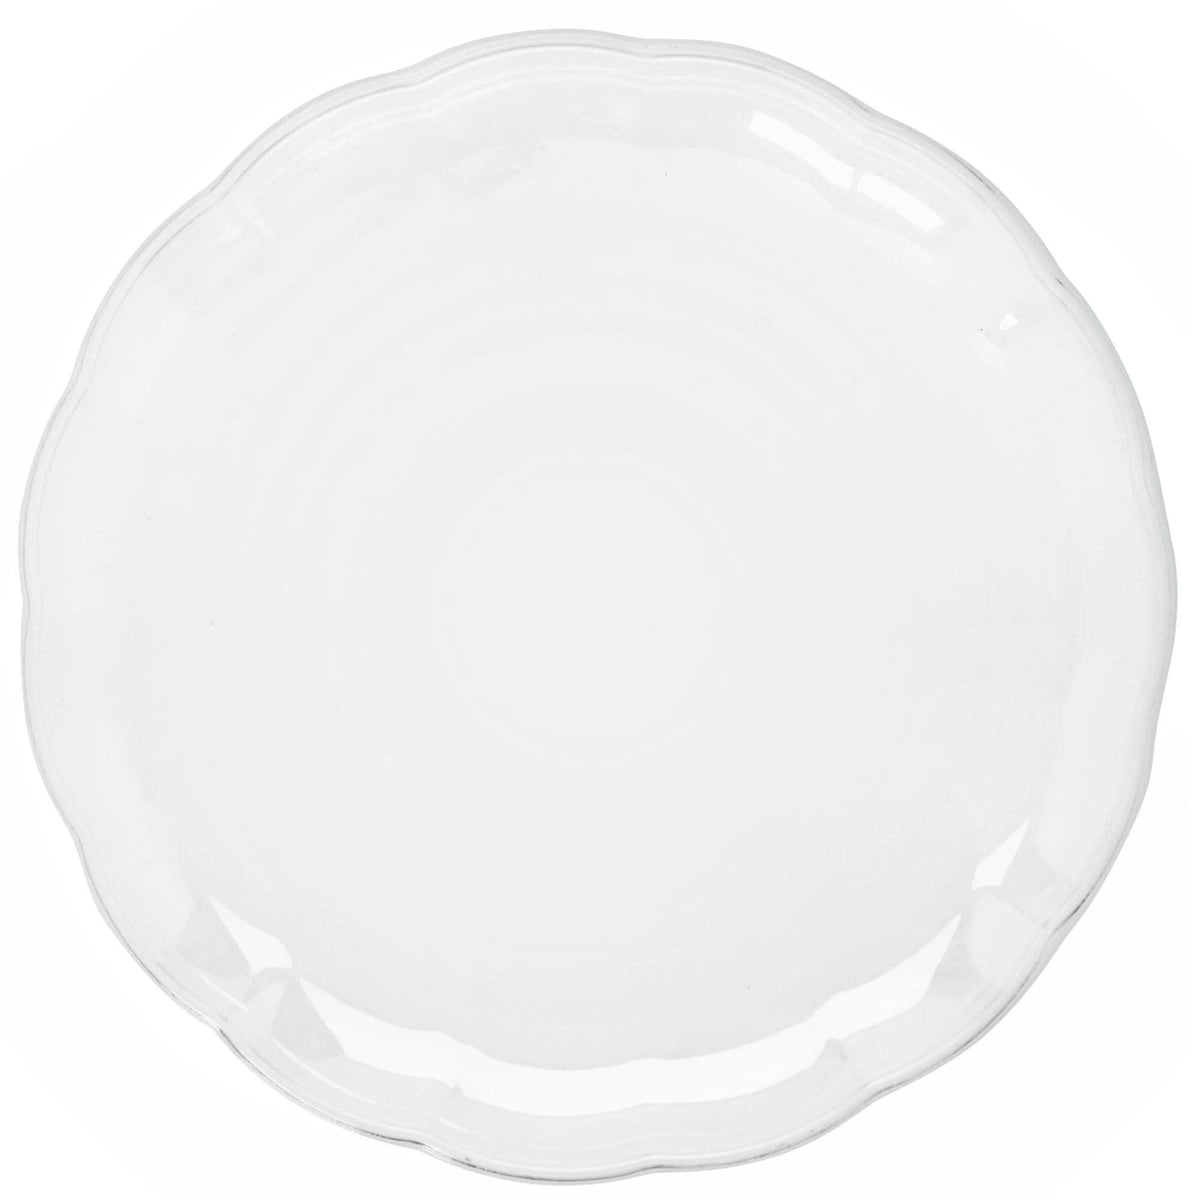 AMSCAN CA Disposable-Plasticware Large Round Scalloped Tray, Clear, 12 Inches, 1 Count 192937438282